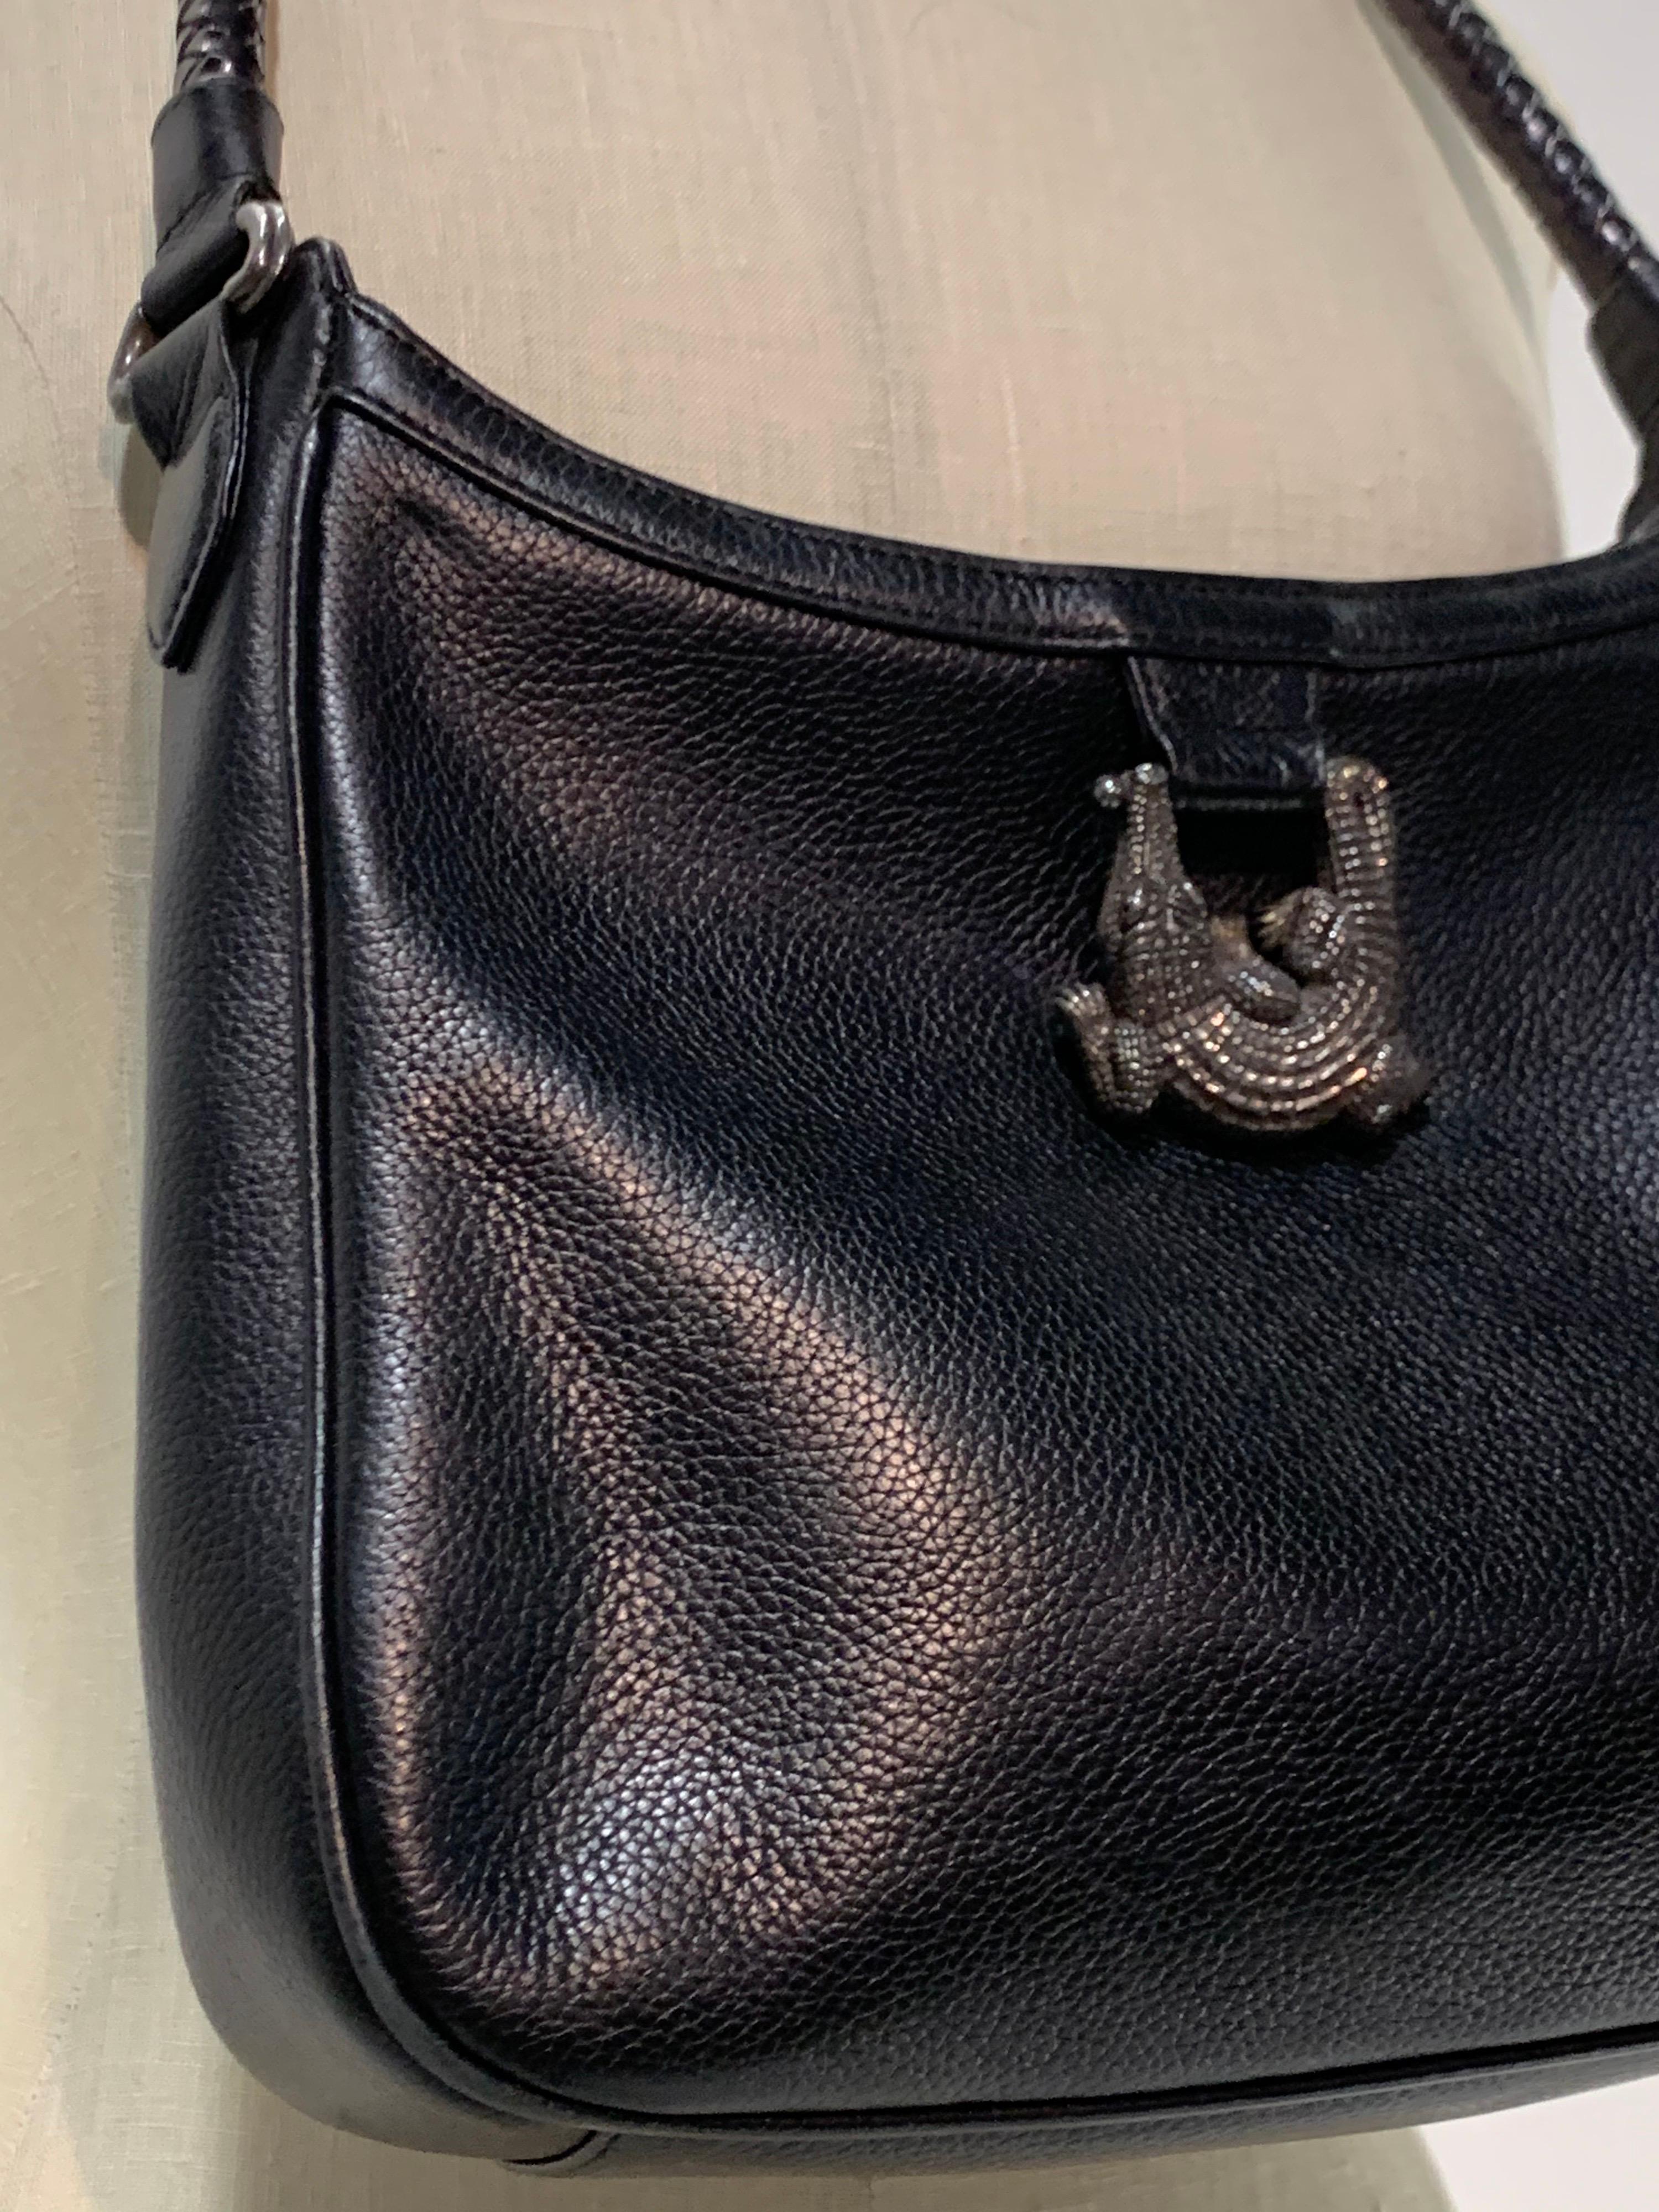 A simple 1980s Barry Kieselstein-Cord black pebbled leather satchel bag with large signature silver alligator hardware. Braided leather handle. Zipper closure. 